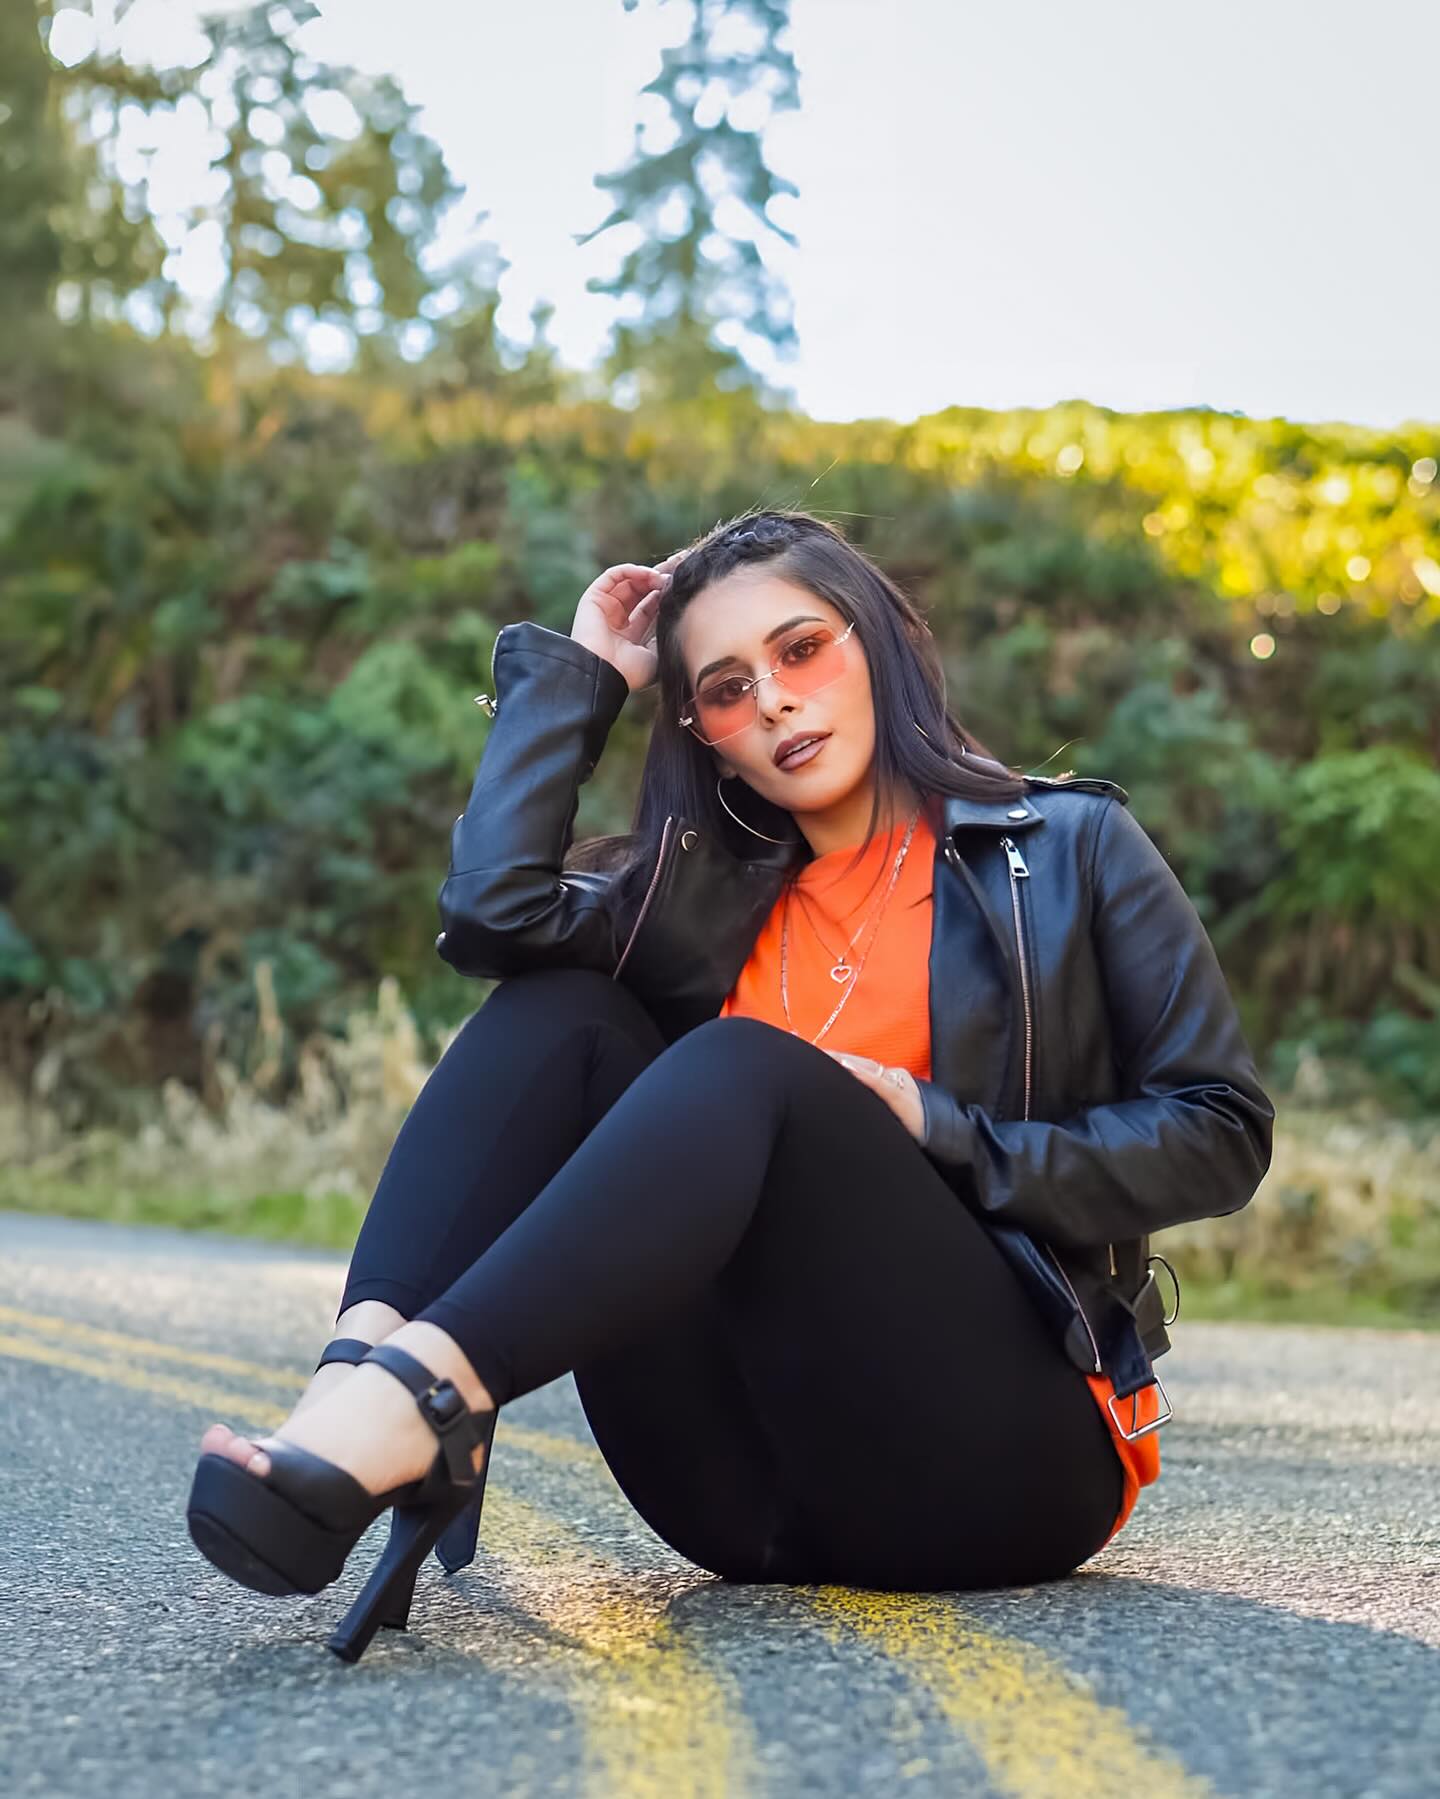 The Other Day ..!! 🧡🖤
.
.
📸 @caspersedits 😘
.
#tuesday #happyvibes #streetphotography #outfitinspiration #model #fashion